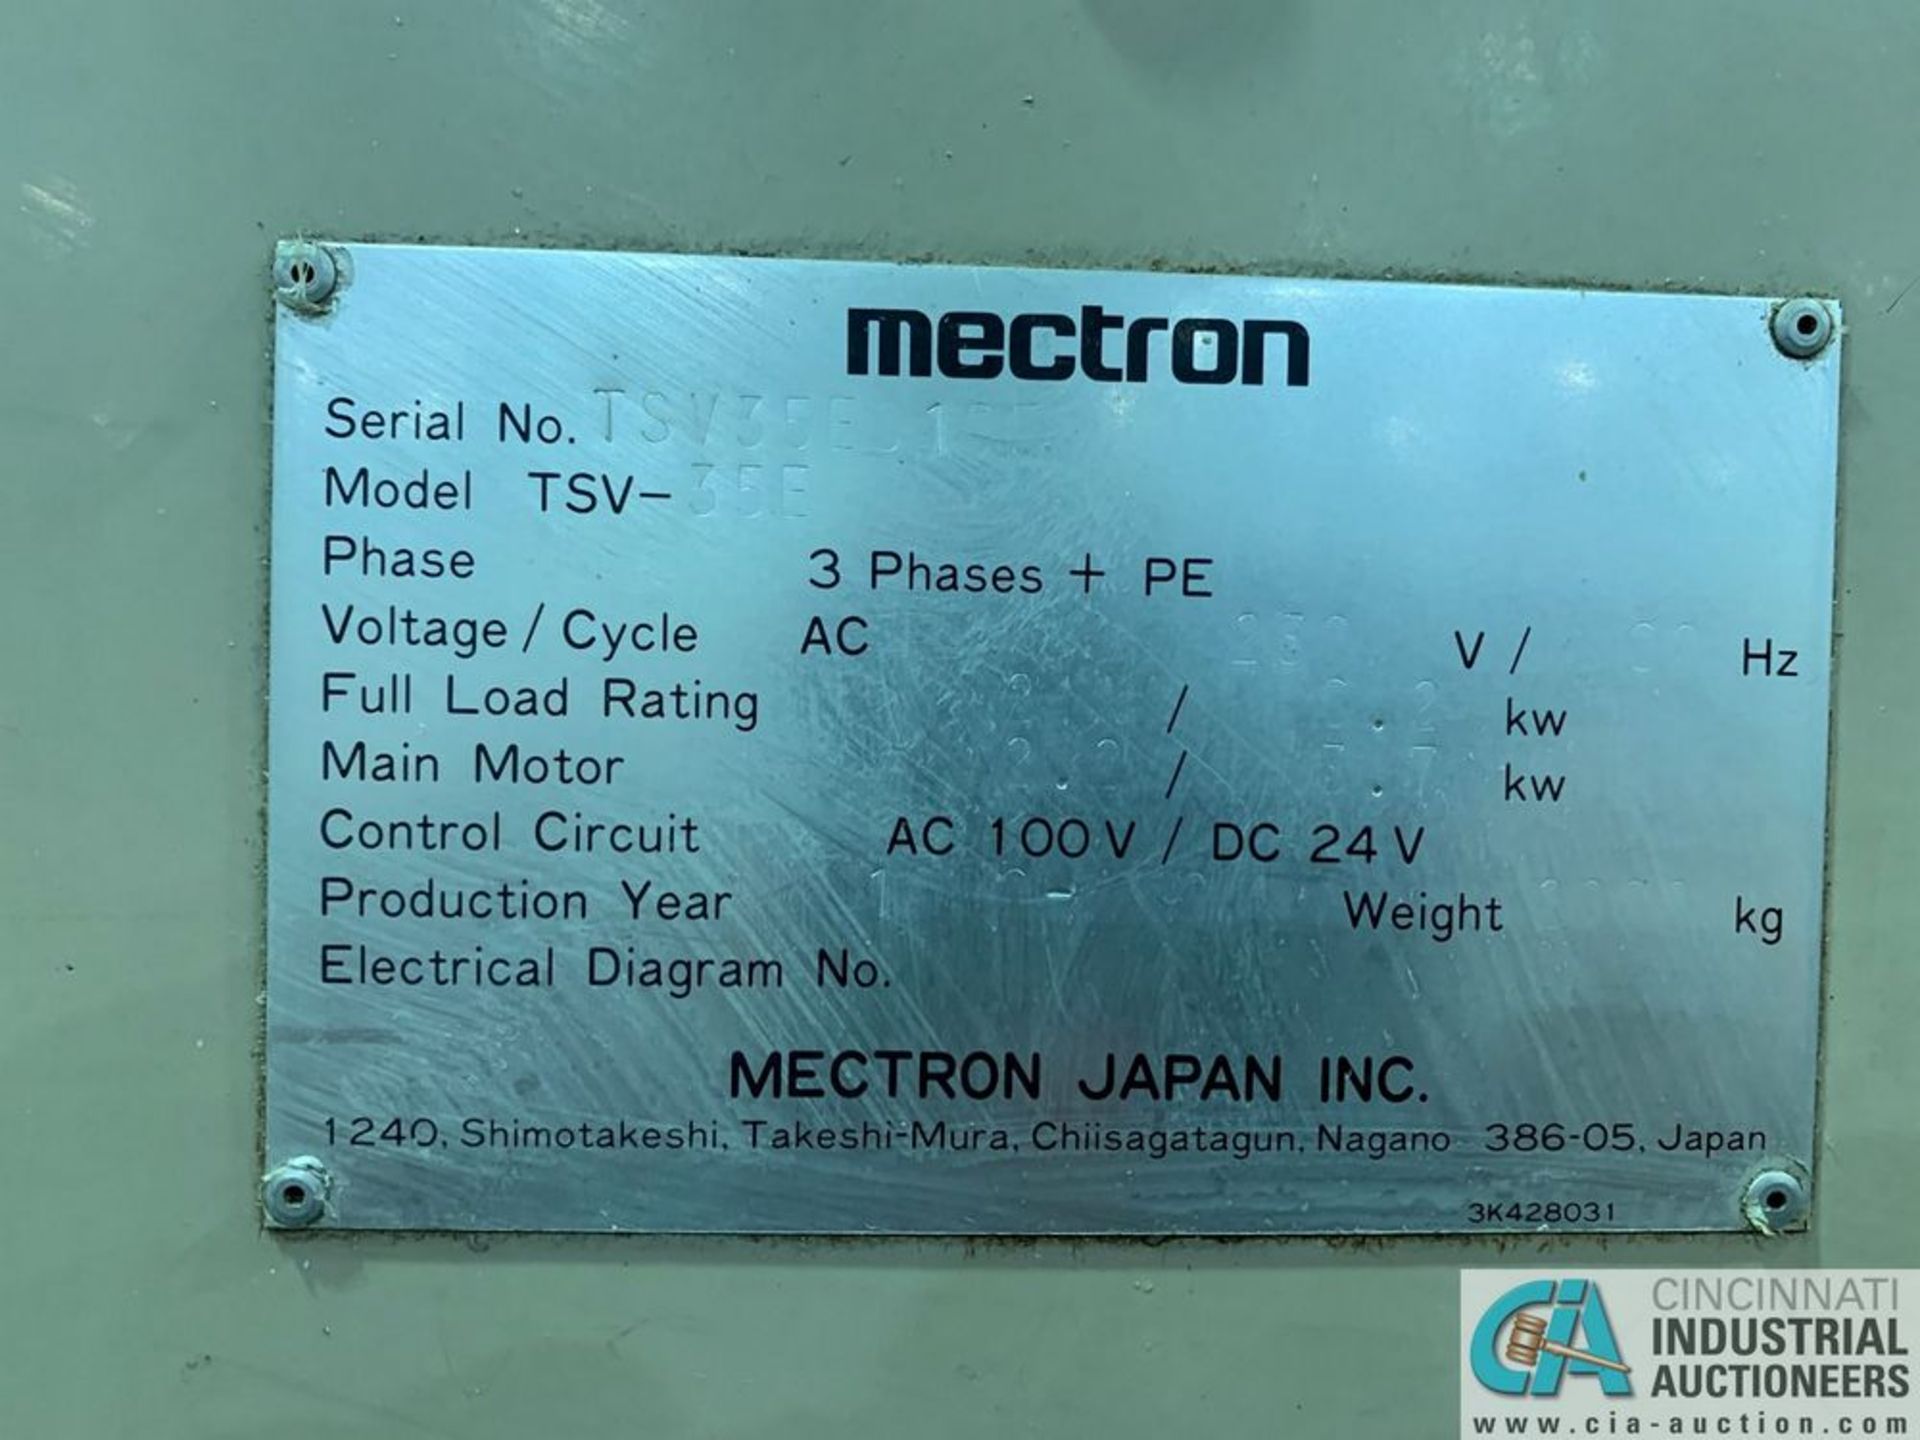 MECTRON MIYANO MODEL TSV-35L CNC DRILLING & TAPPING CENTER W/ 4TH AXIS; S/N TSV35E0135, *Loading fee - Image 8 of 9